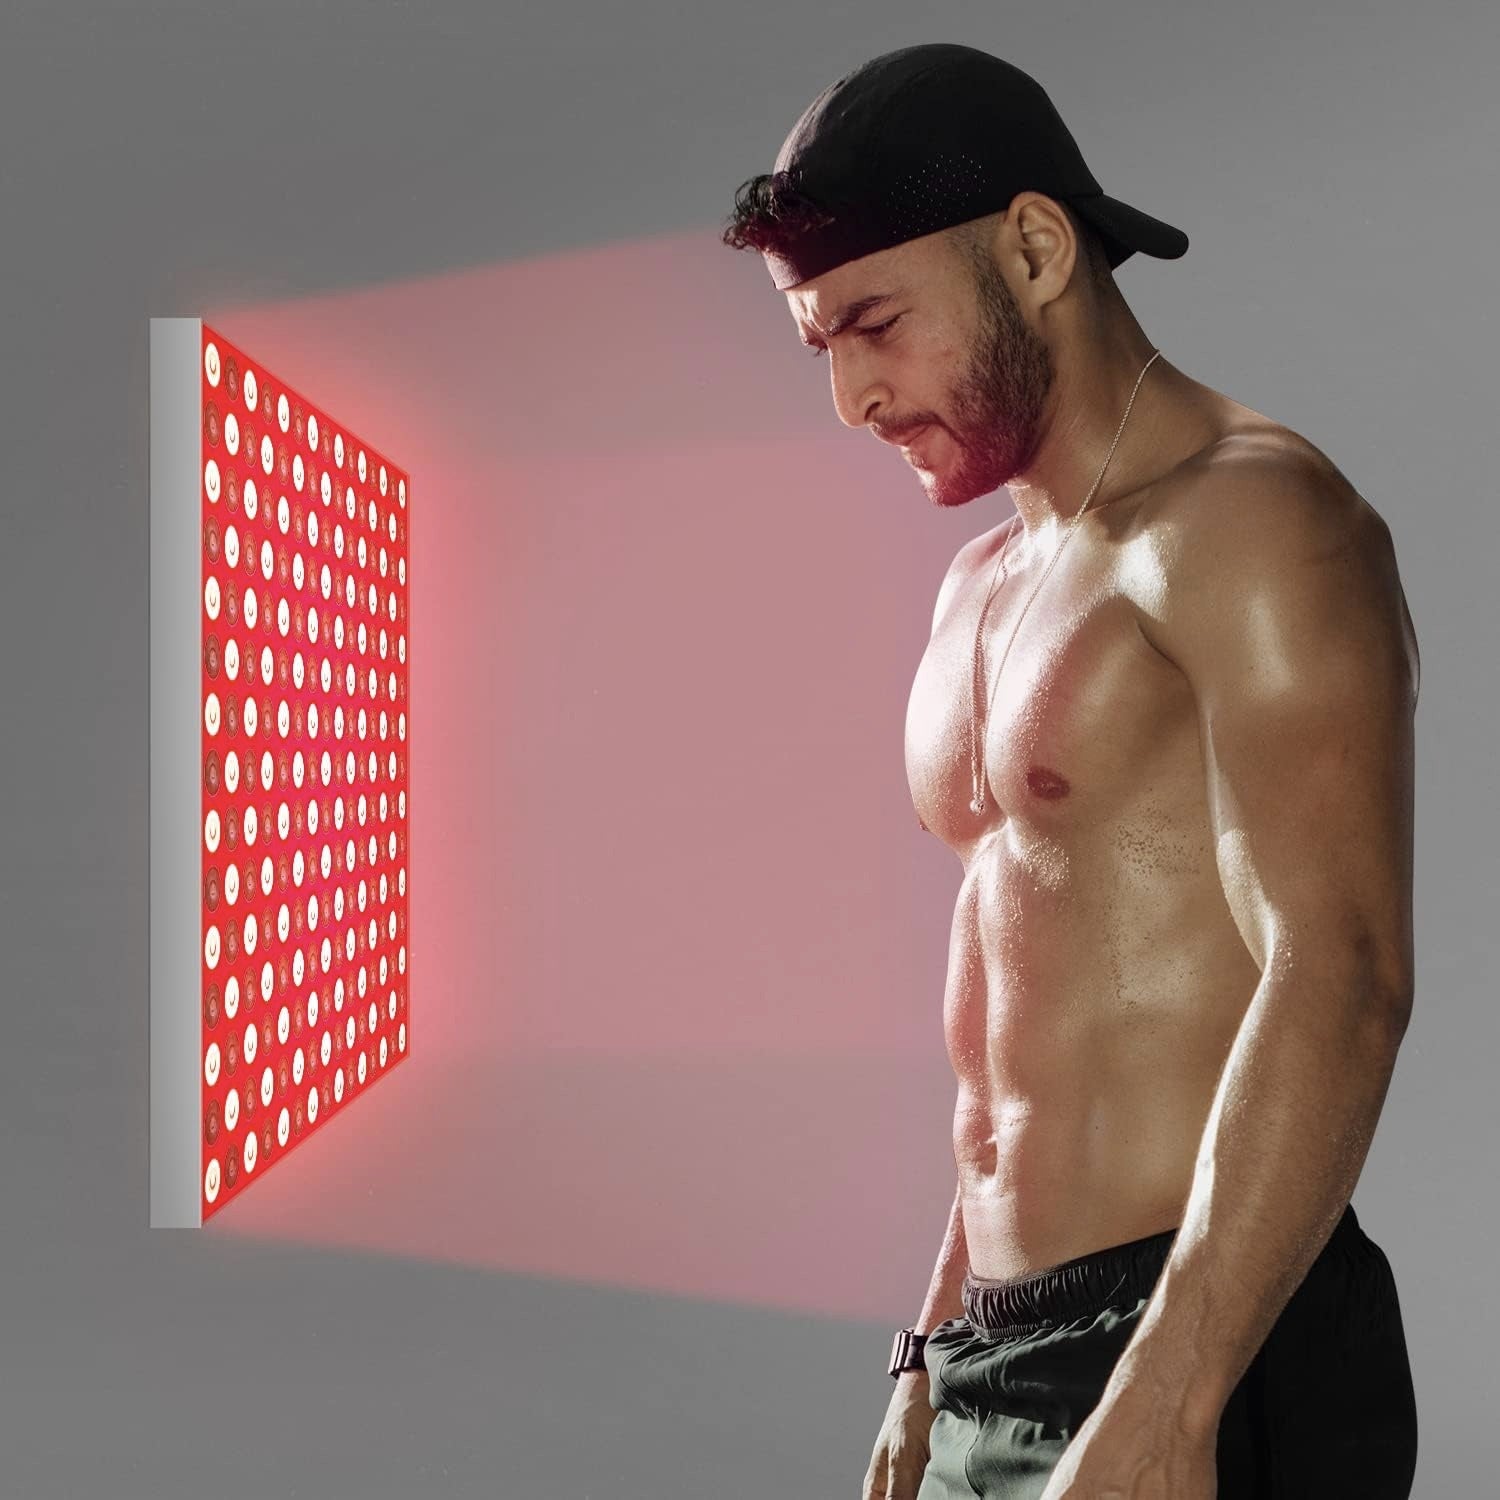 Near Infrared - LED Red Light Therapy